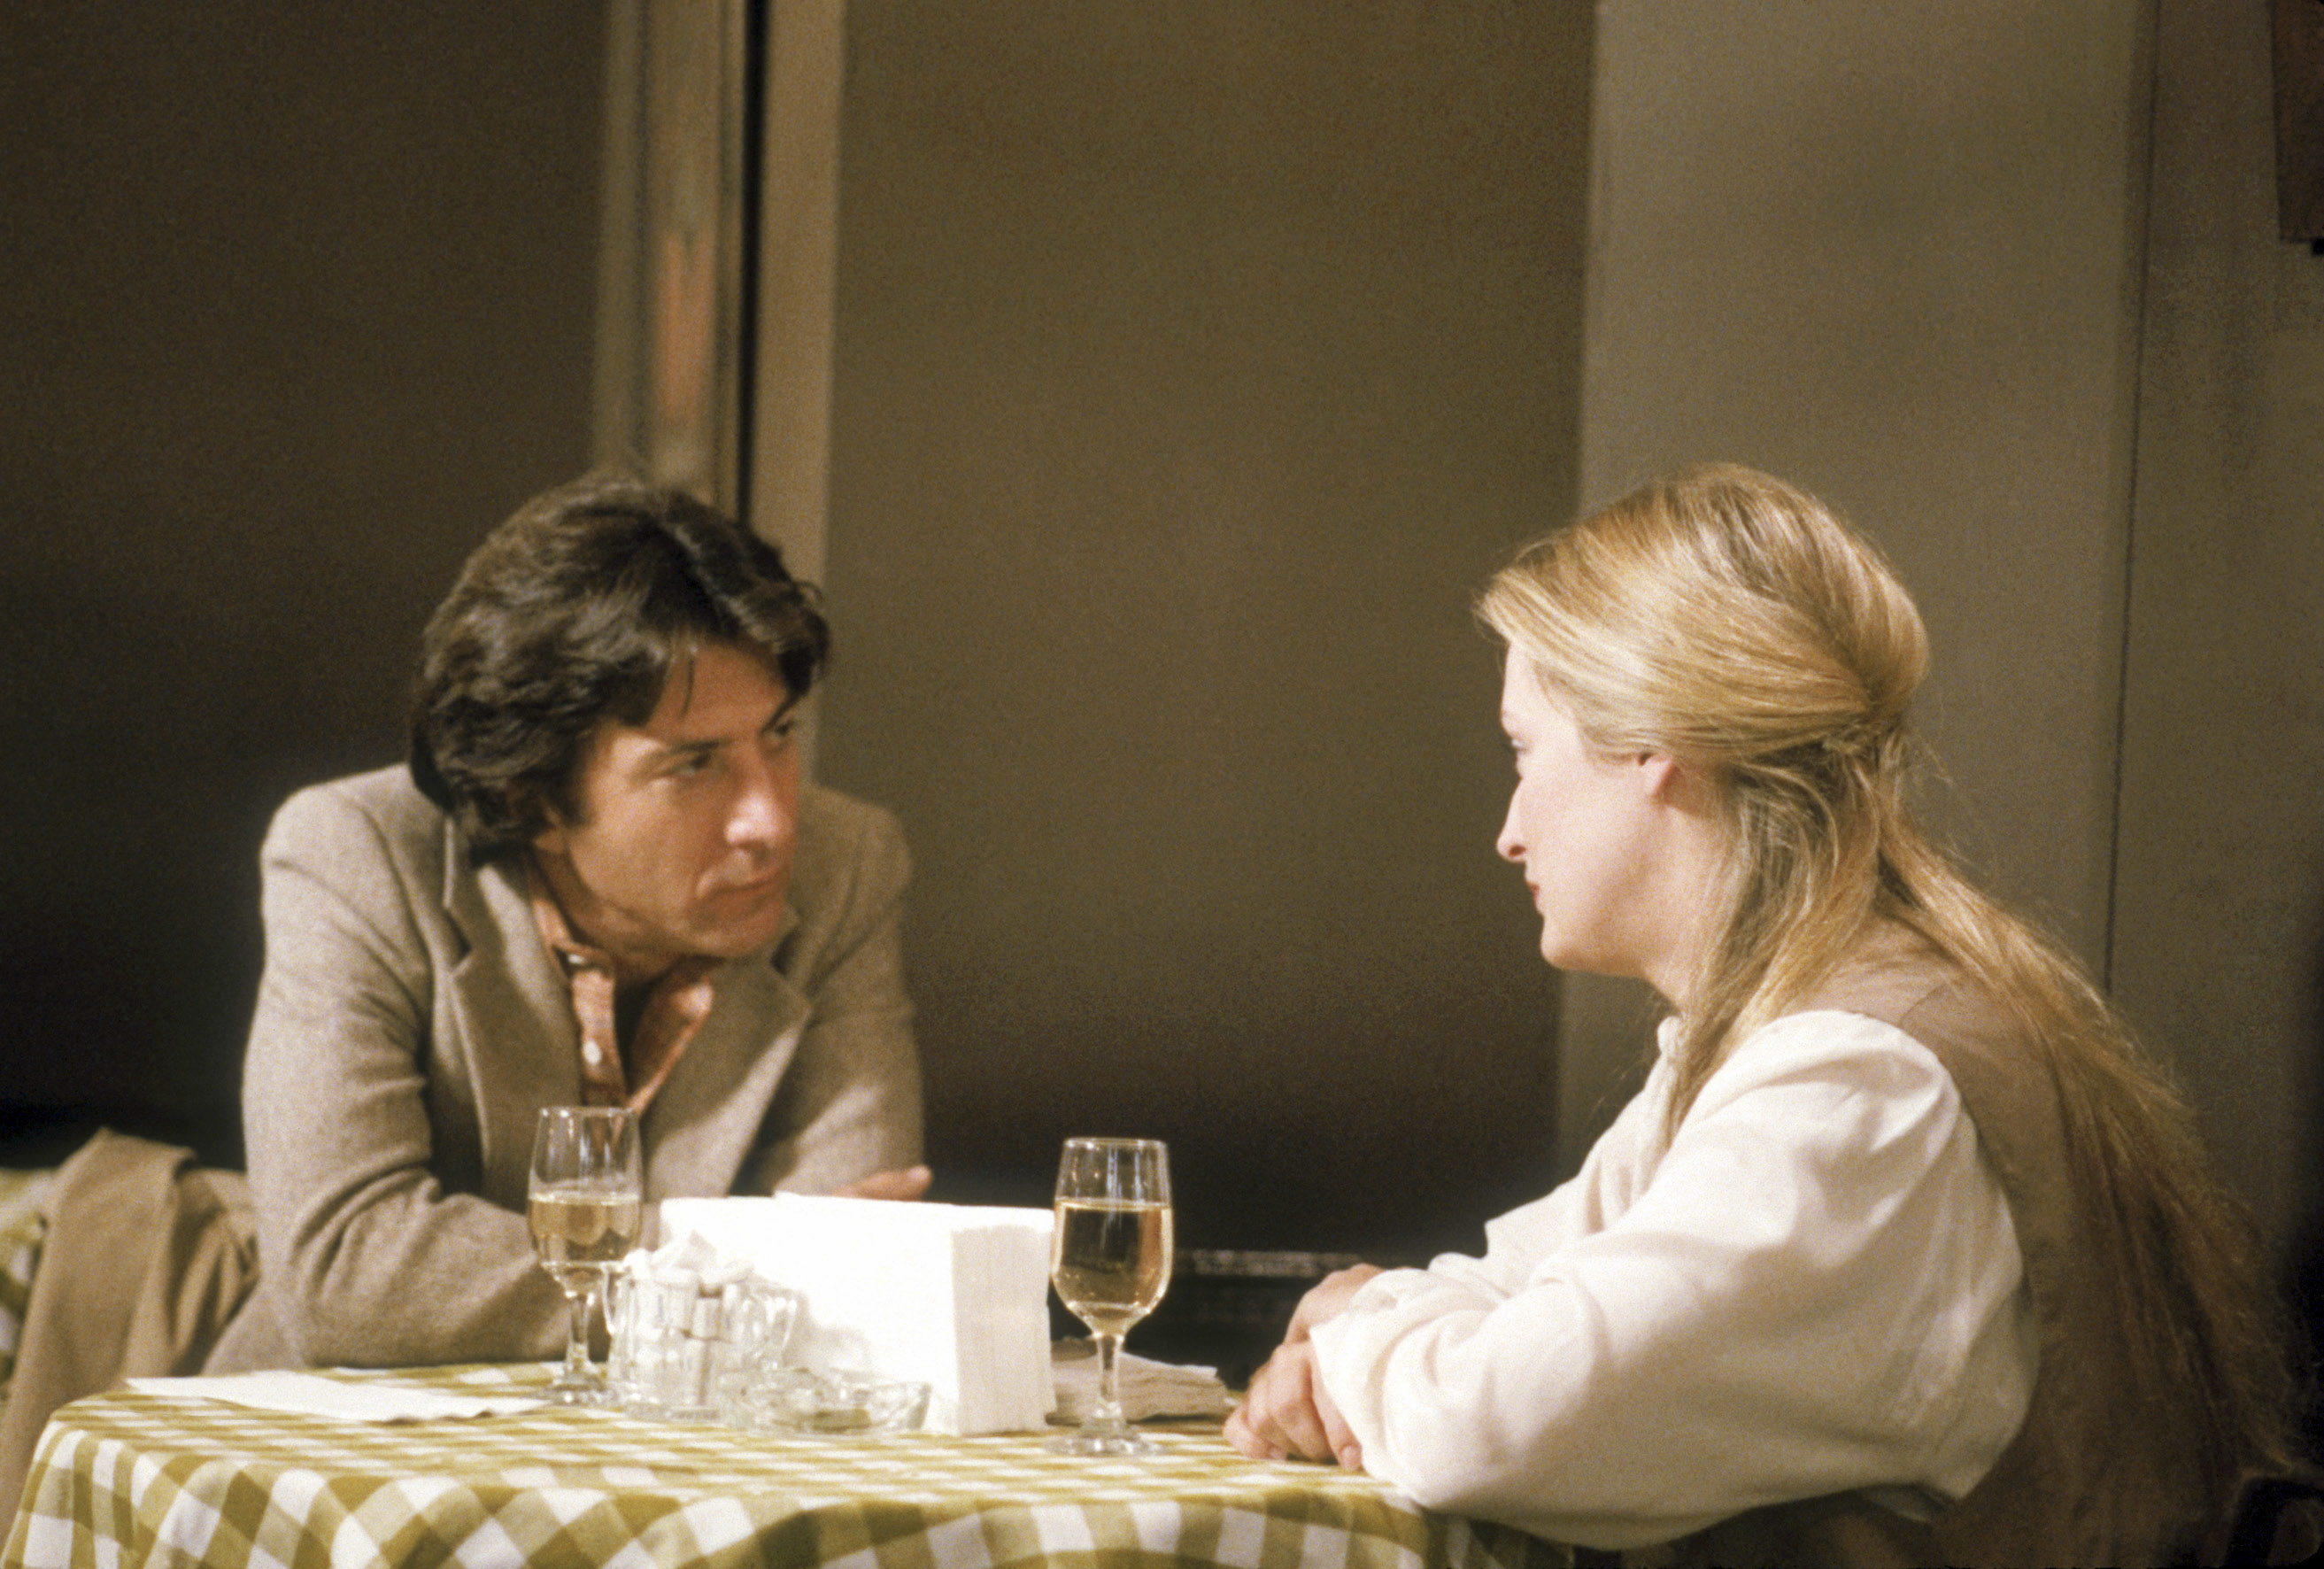 In a scene, Dustin appears attentive while Meryl speaks, set in a dining setting with a checkered tablecloth